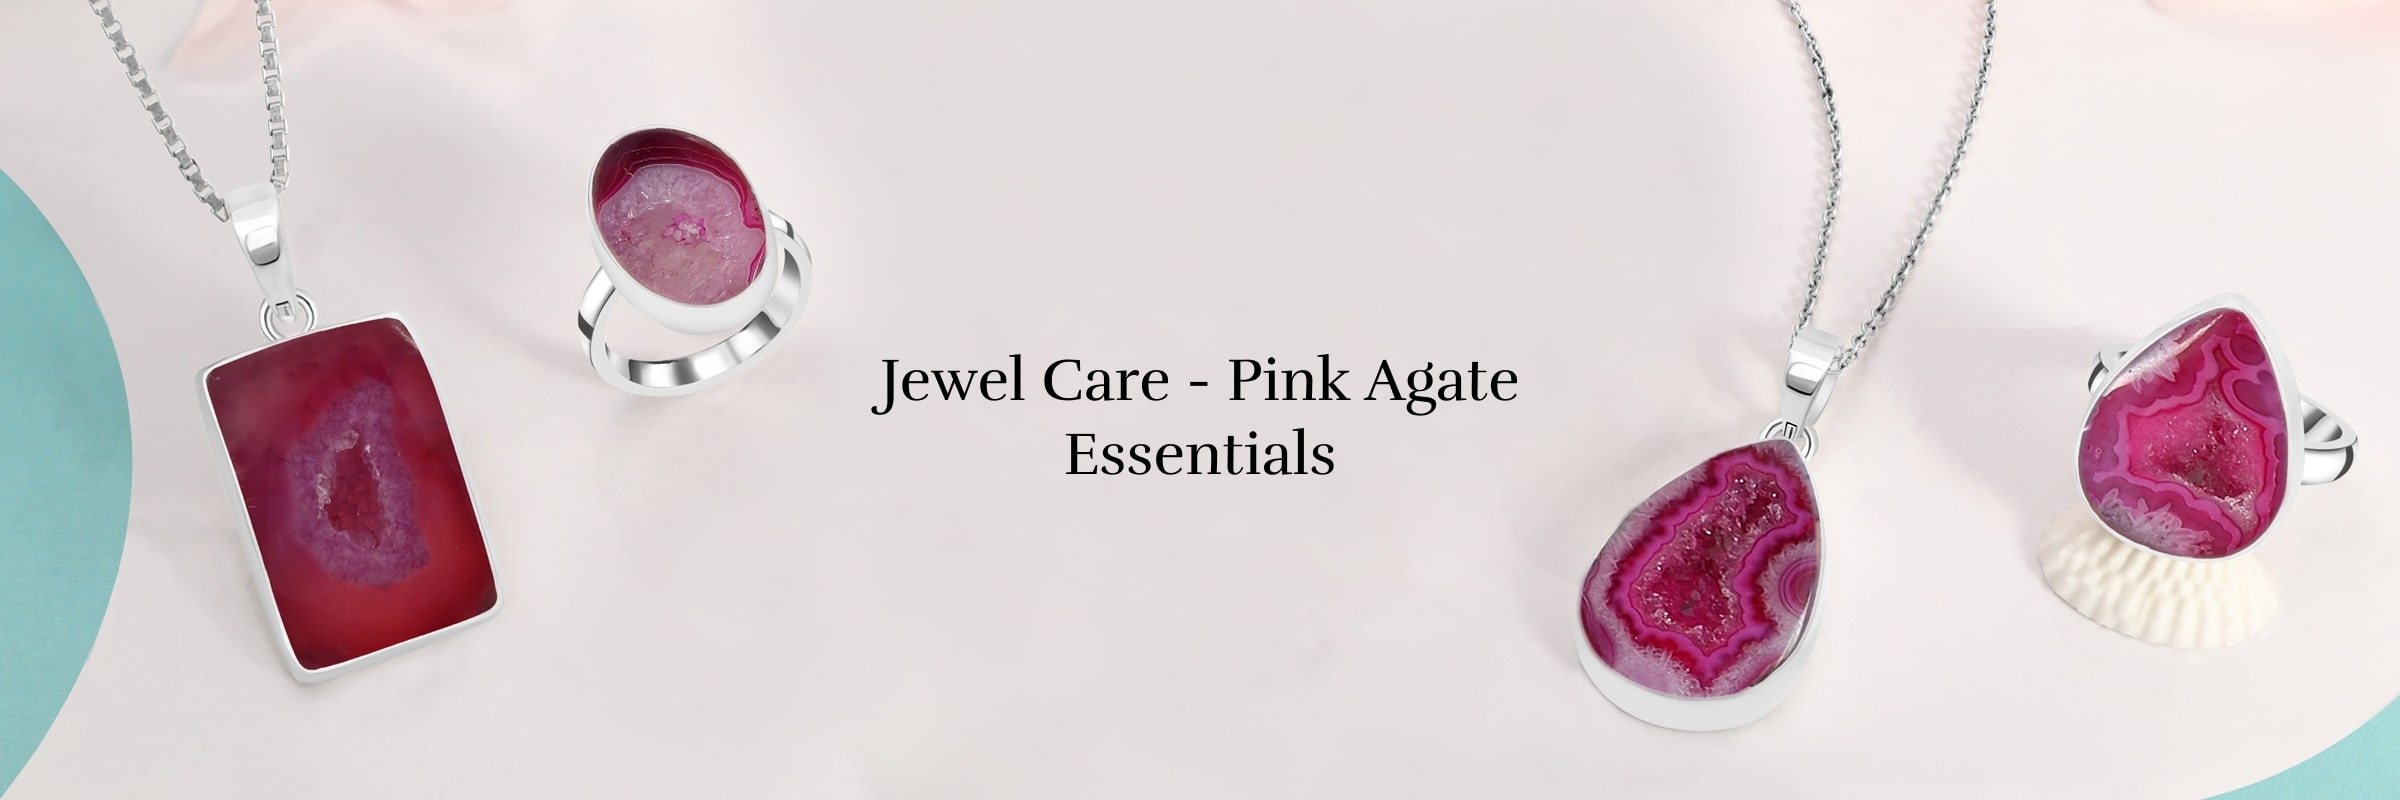 How to Care for Your Pink Agate Jewelry?